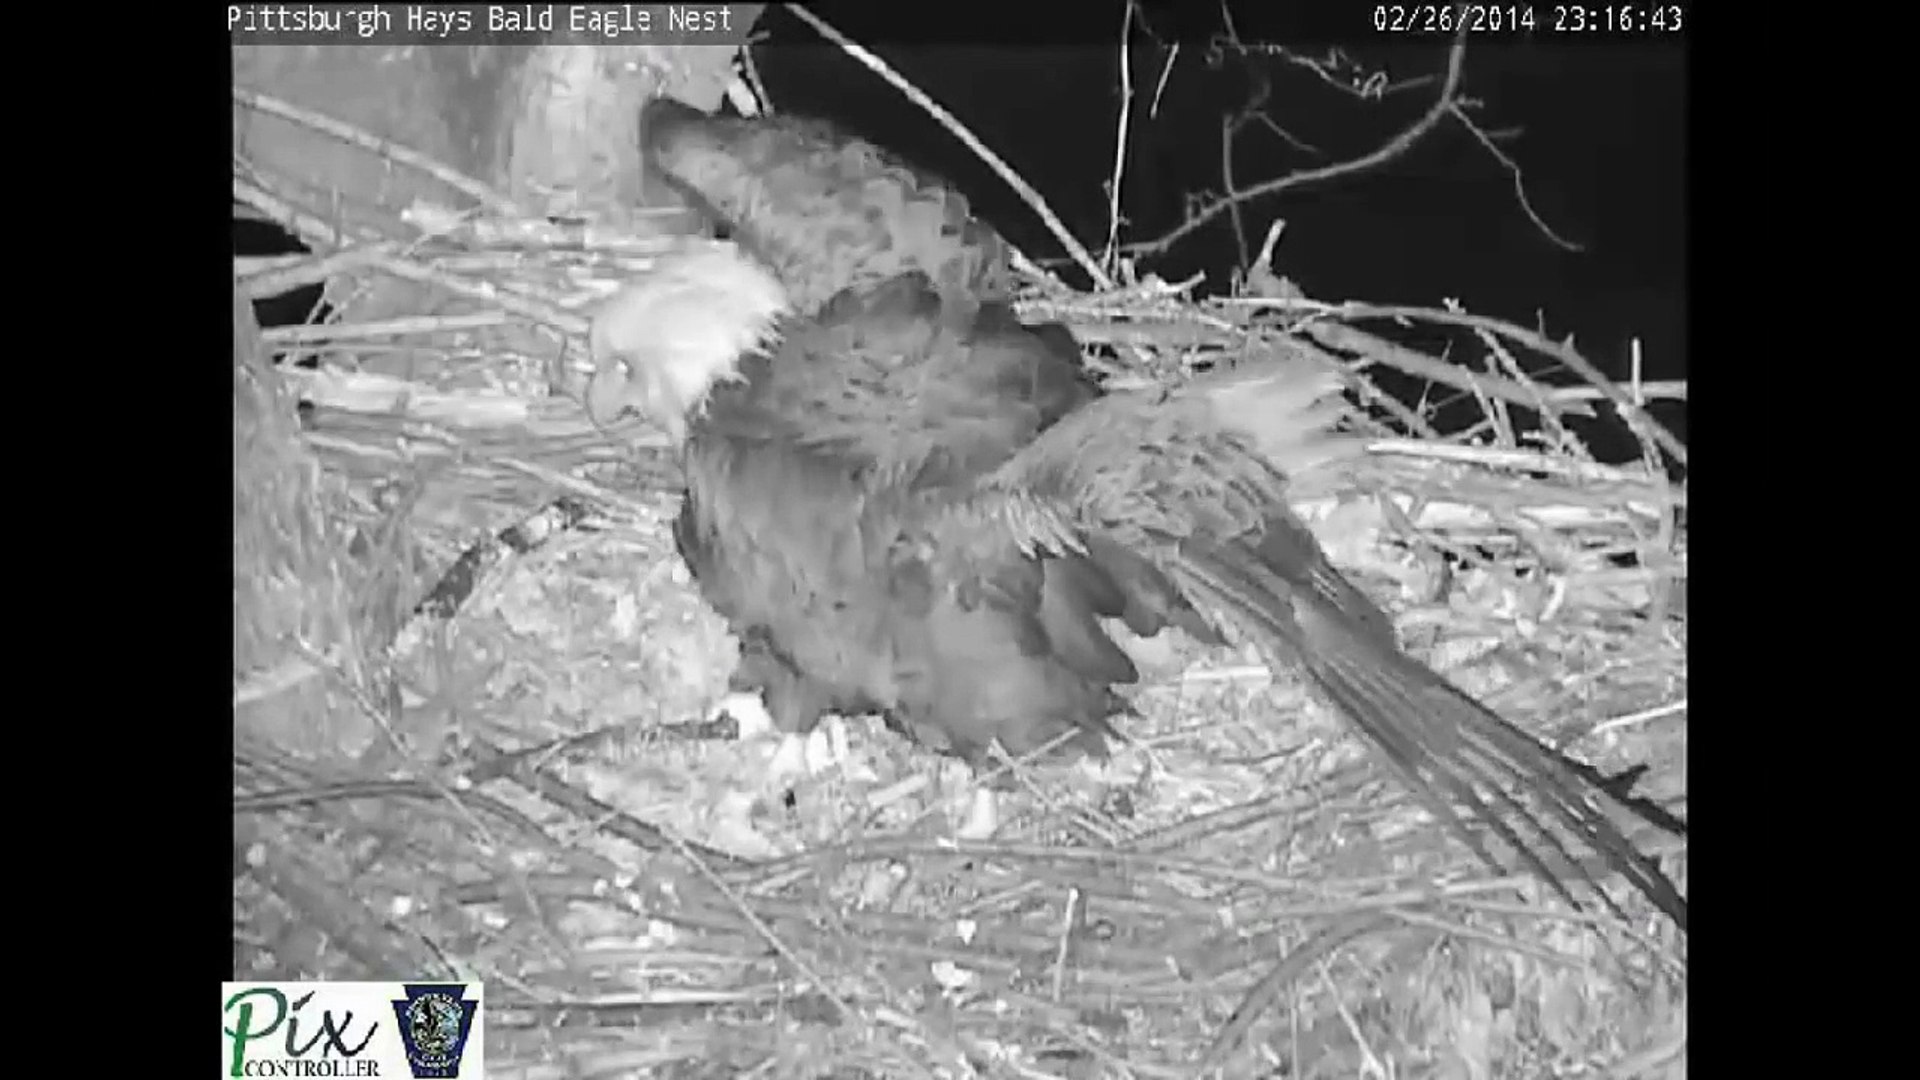 Dramatic video of a raccoon attacking the Pittsburgh Hays bald eagles